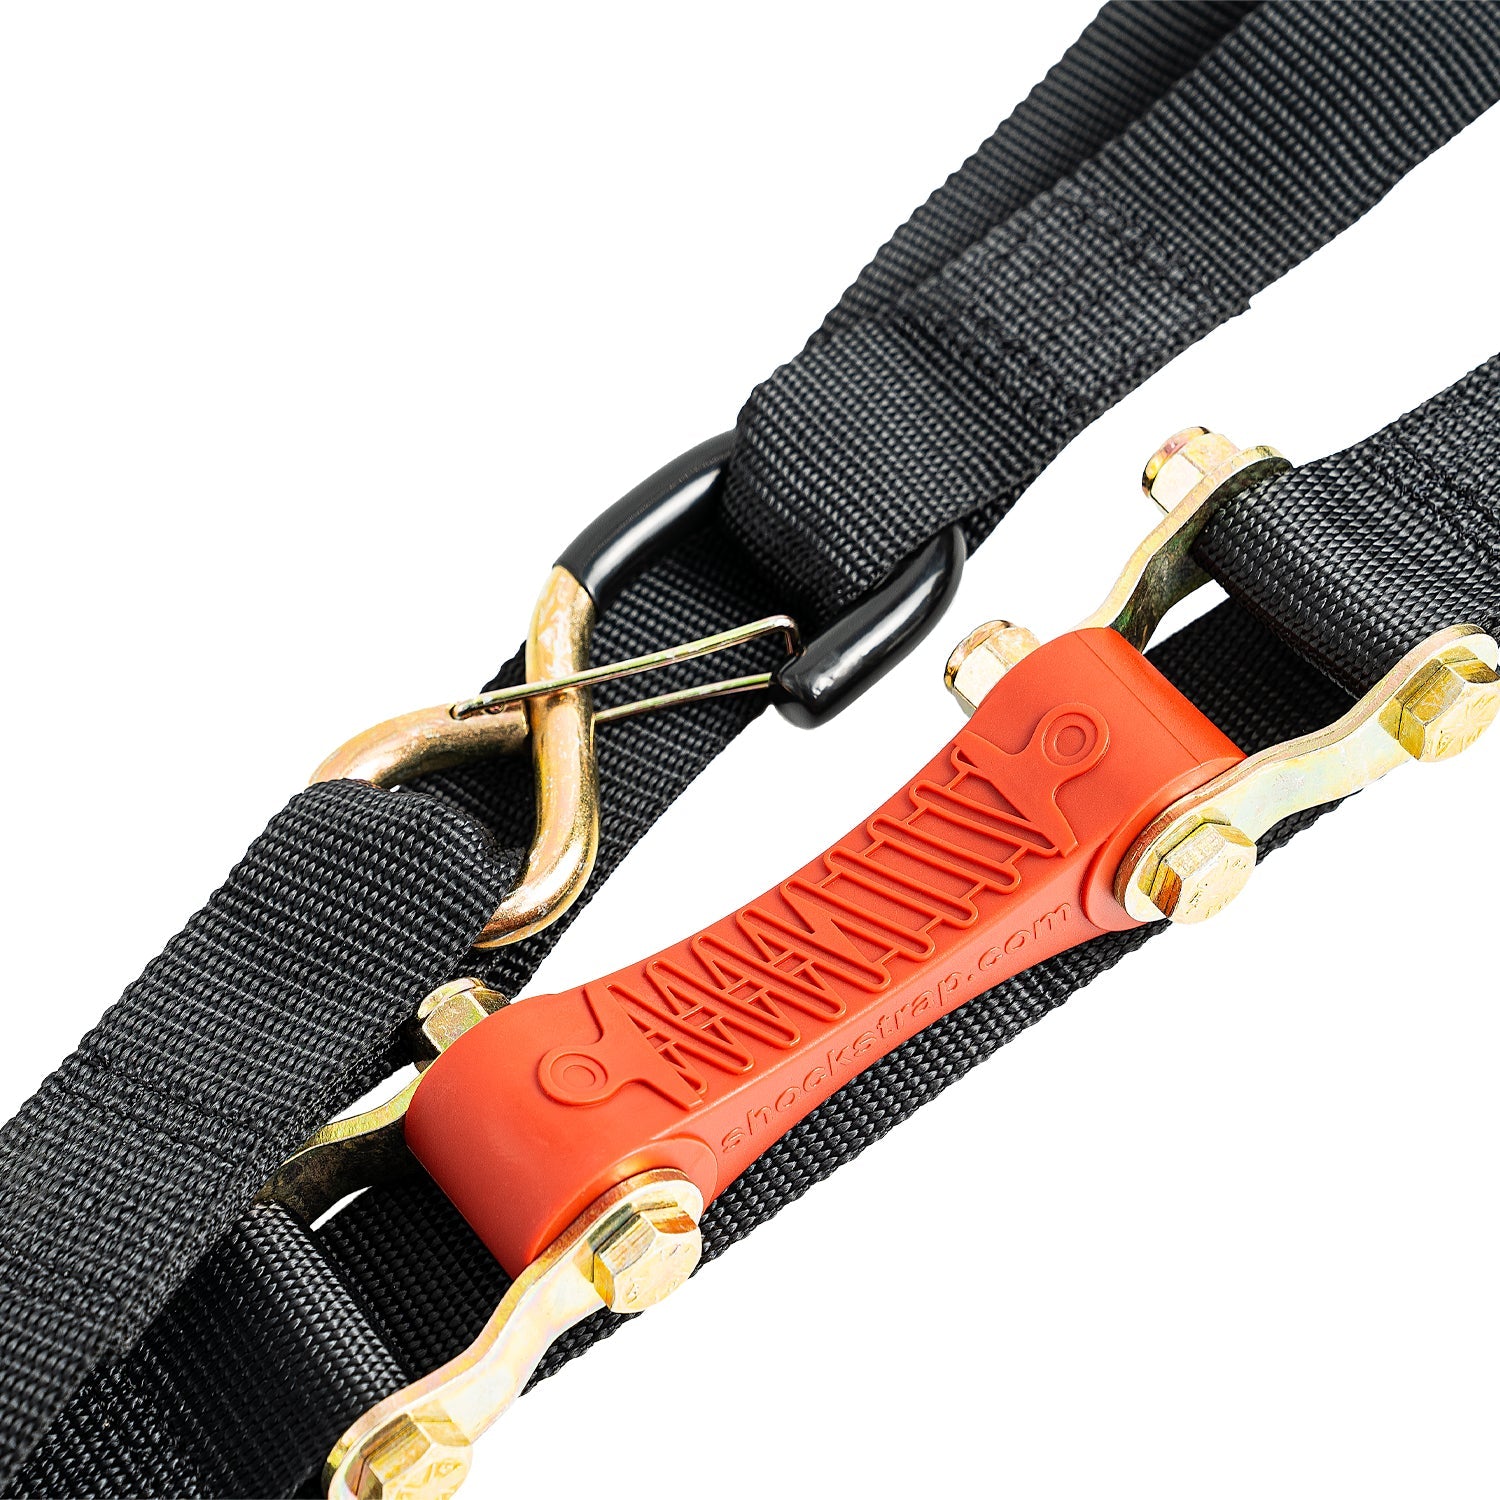 15ft x 1.5in ShockStrap Ratchet Strap, 1k WLL - The Perfect Bungee & ShockStrap Tie Downs